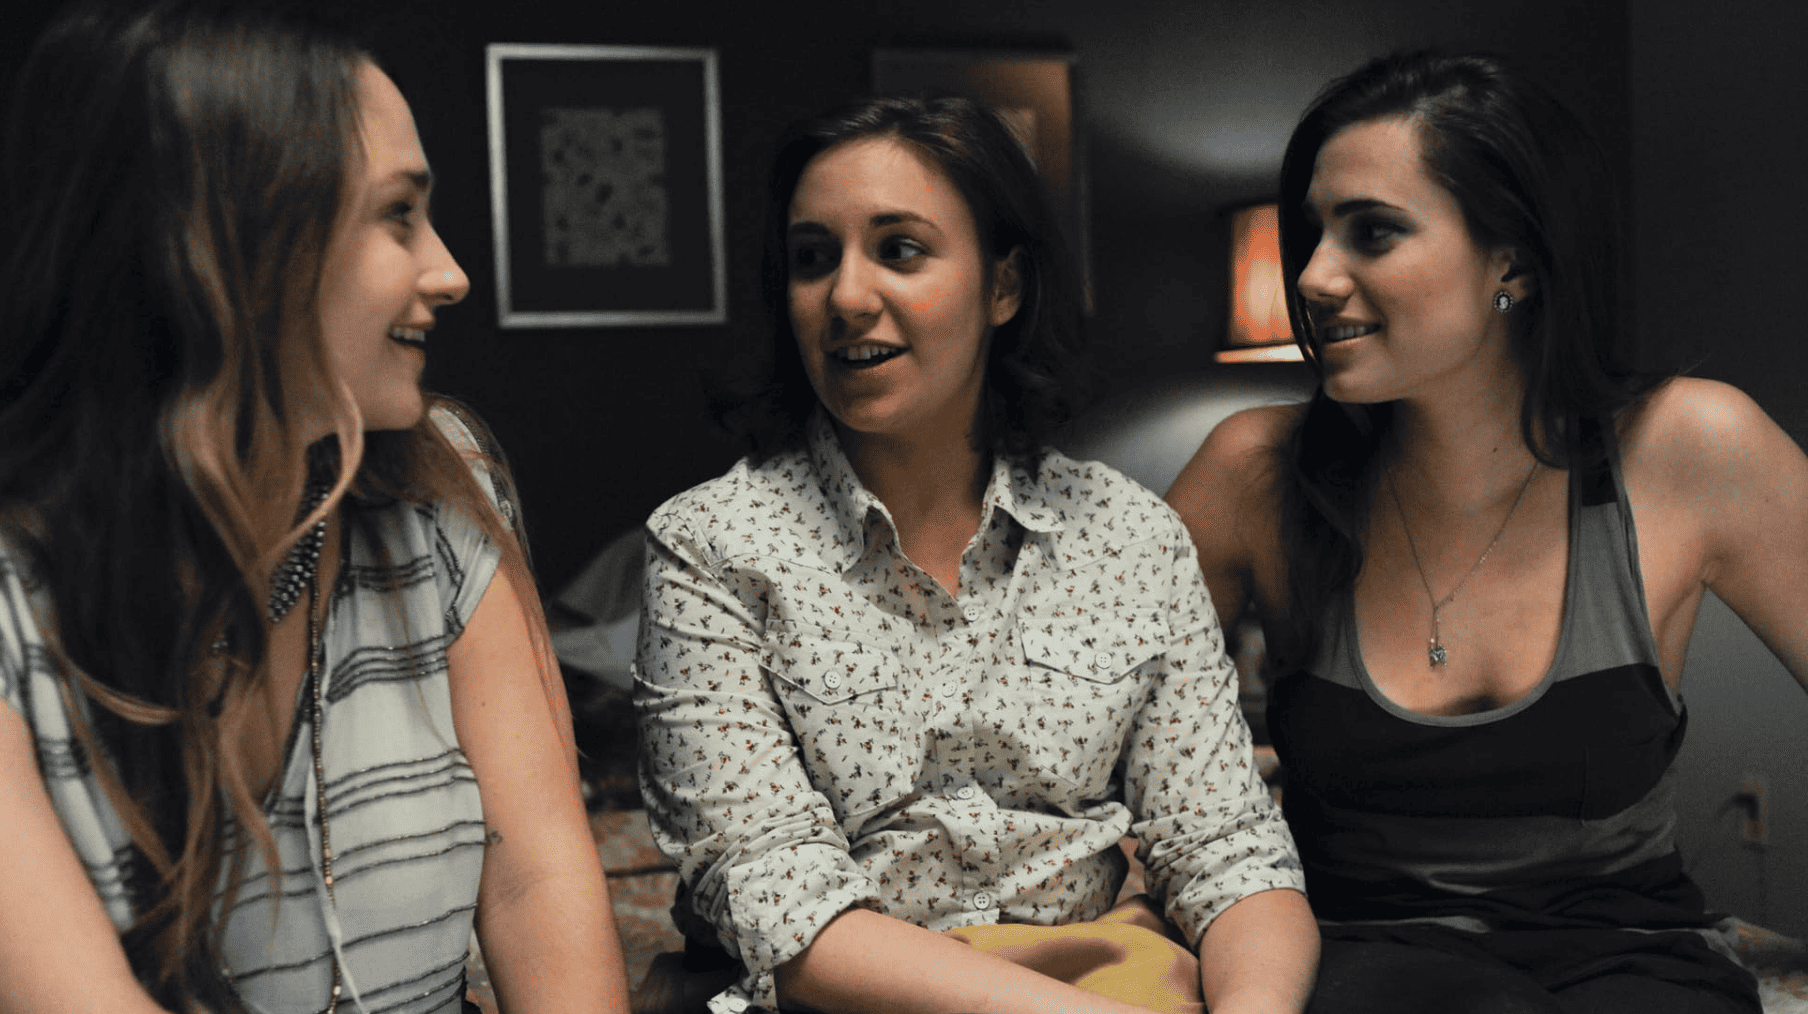 Jemima Kirke, Lena Dunham, and Allison Williams as three college friends hanging out in this image from Apatow Productions